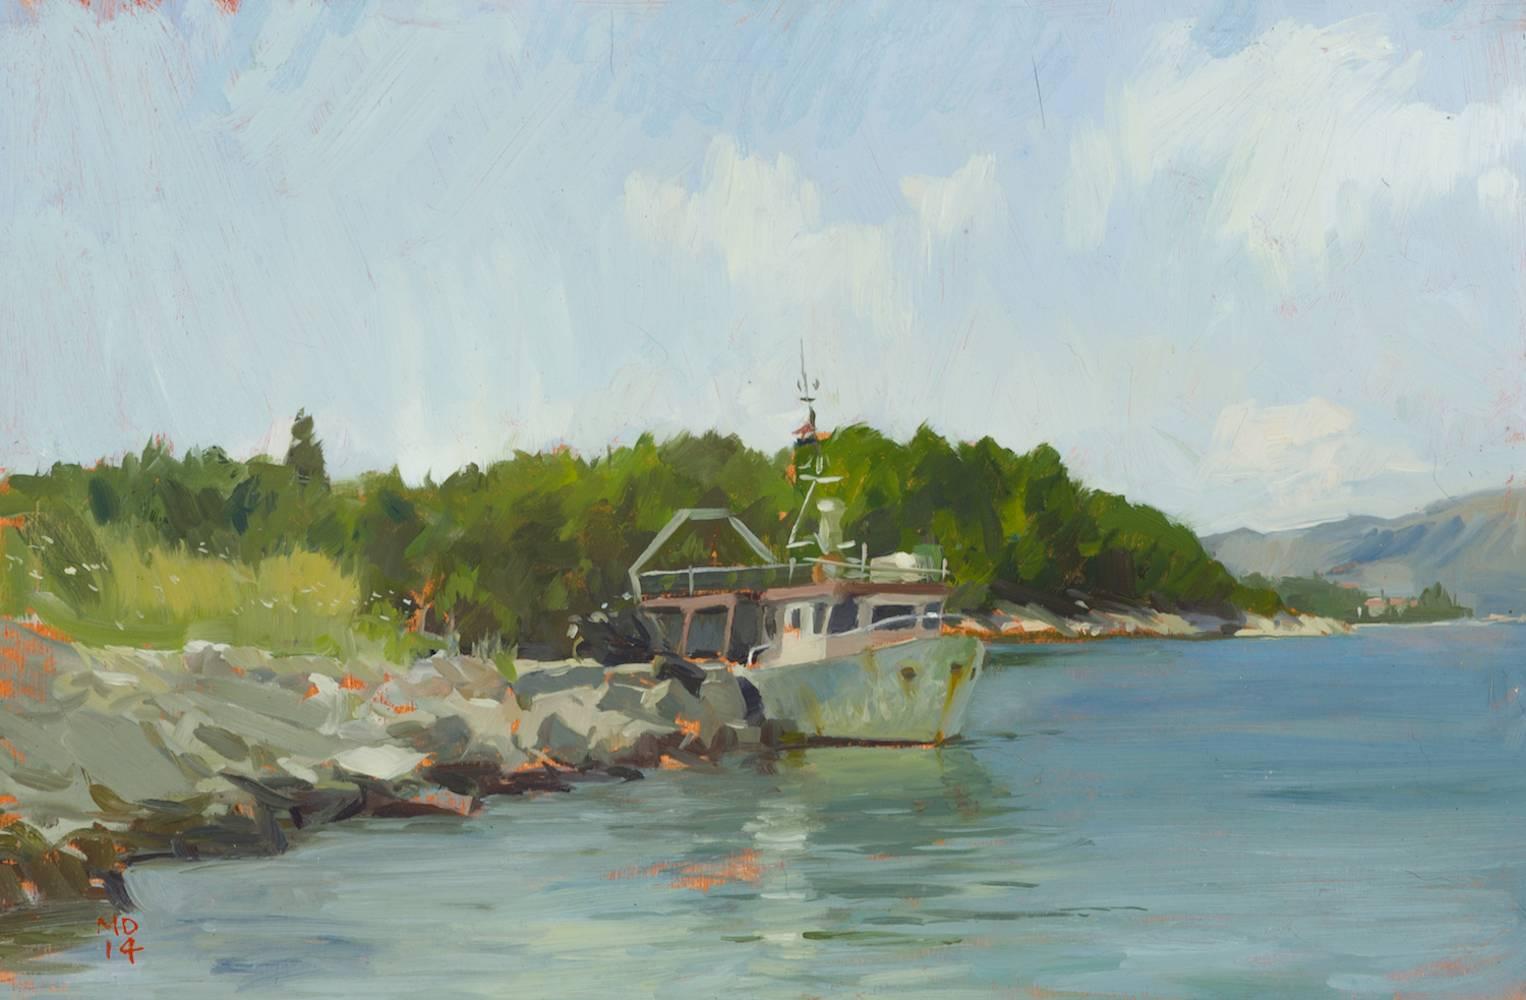 Marc Dalessio Landscape Painting - "Korcula Fishing Boat" contemporary plein air painting, blue, green, shoreline